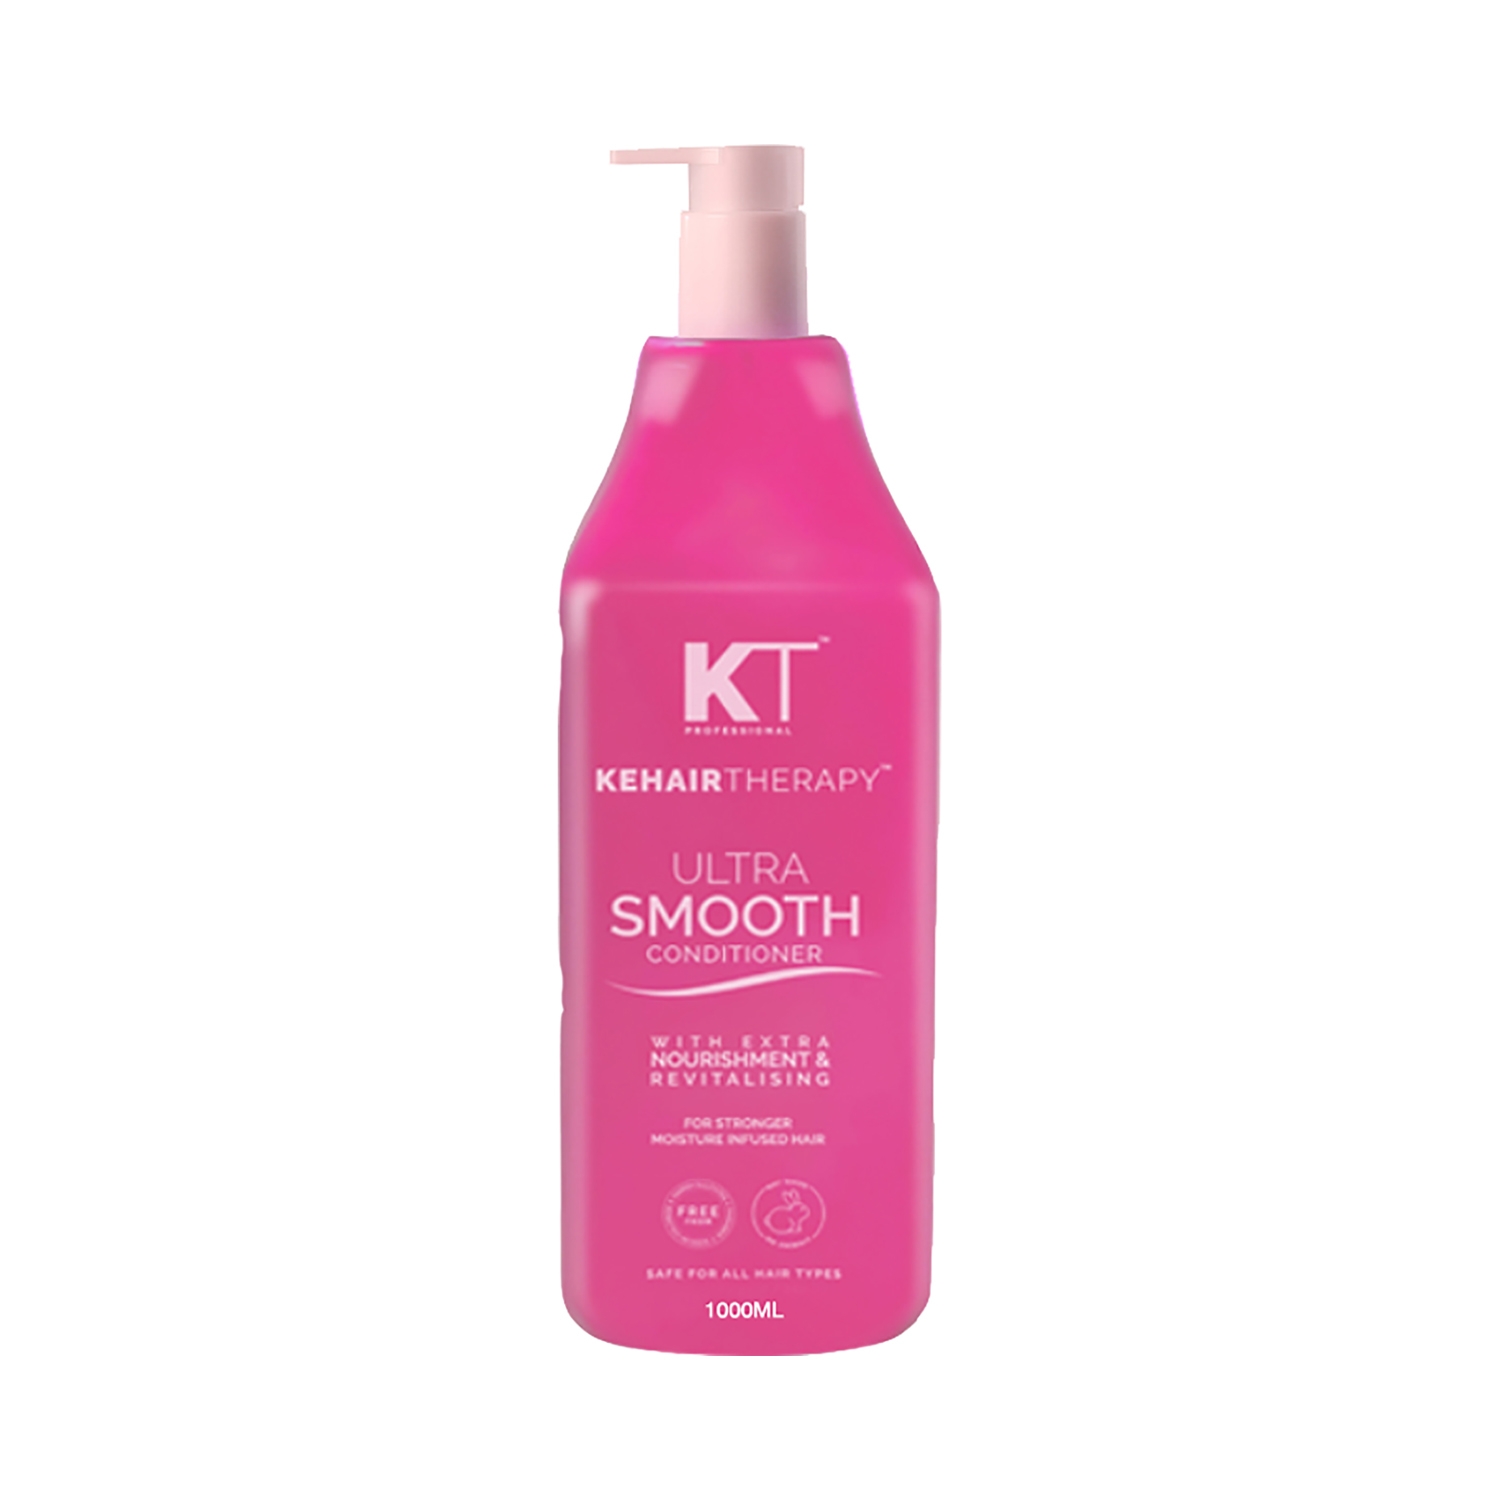 KT Professional | KT Professional Kehairtherapy Ultra Smooth Conditioner (1000ml)